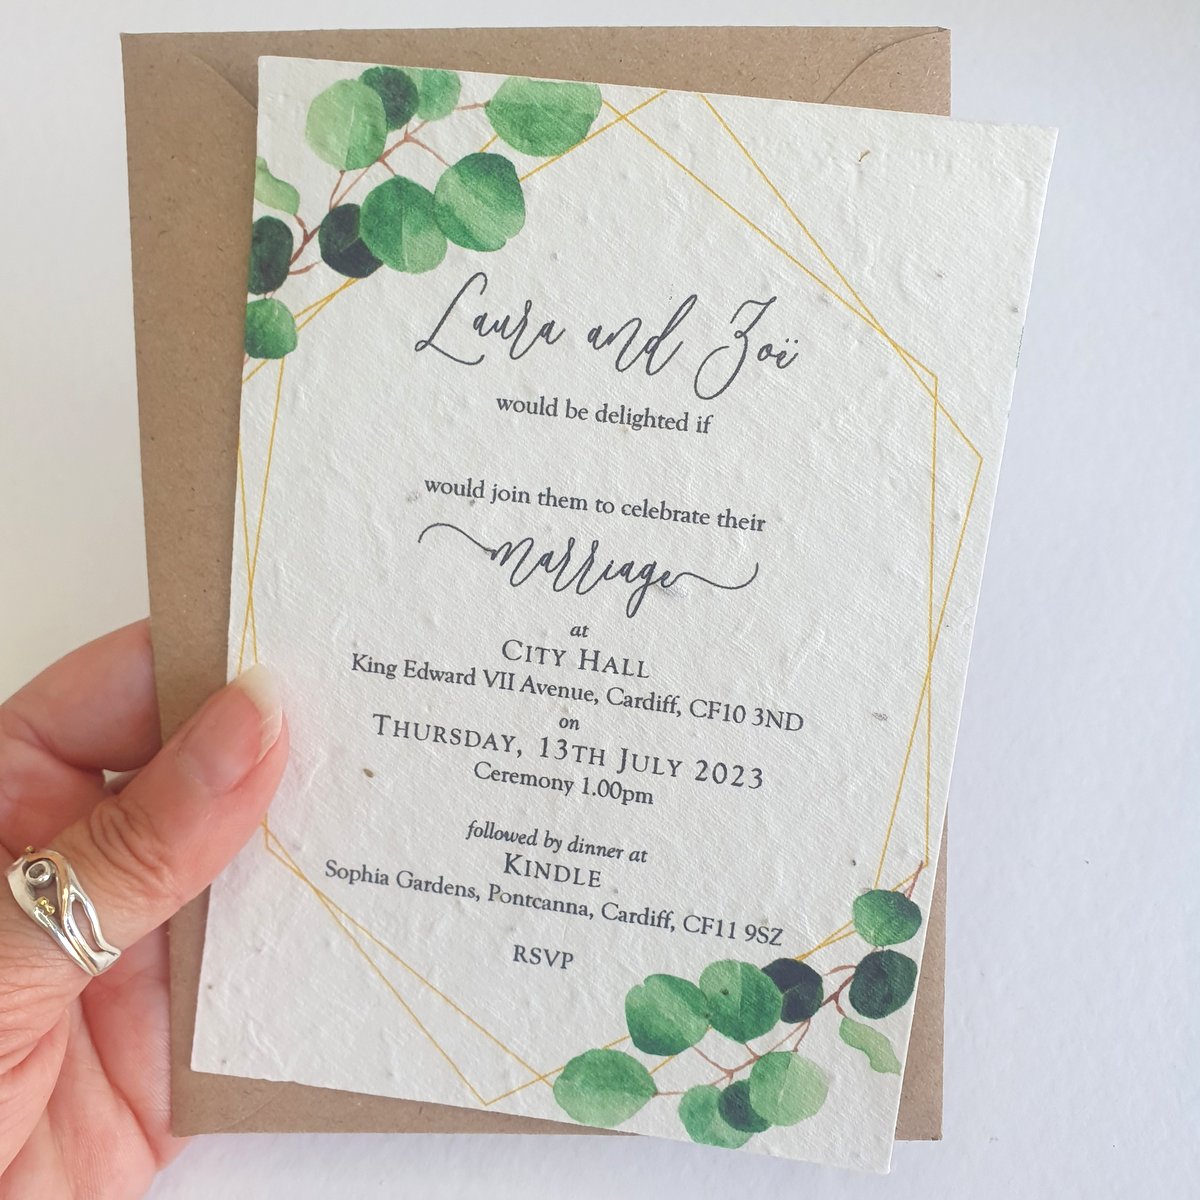 Do you write guest names on wedding invitations?